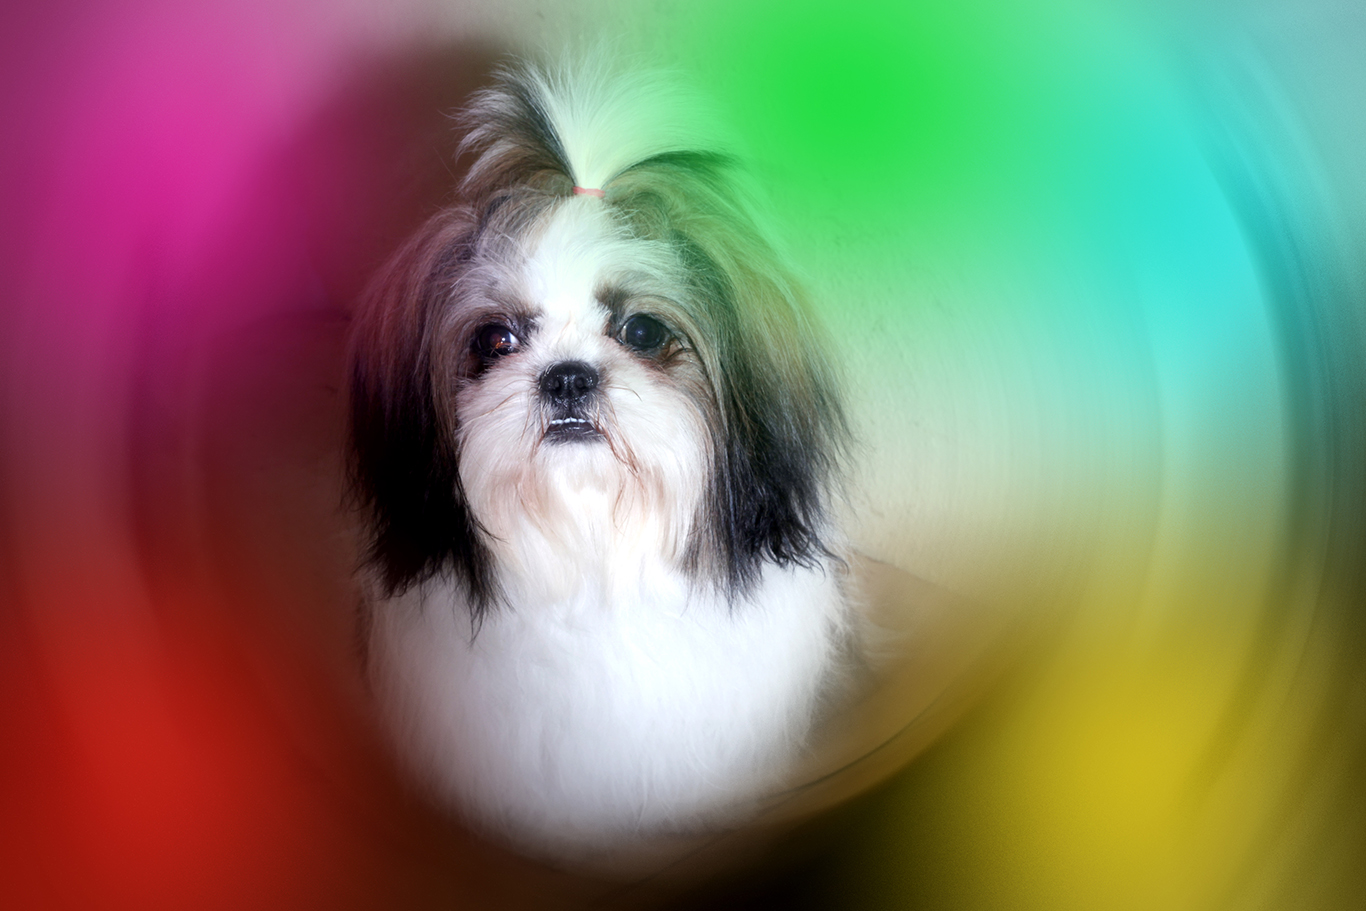 Image of shih tzu posted on 2022-01-28 13:10:23 from Indiranagar